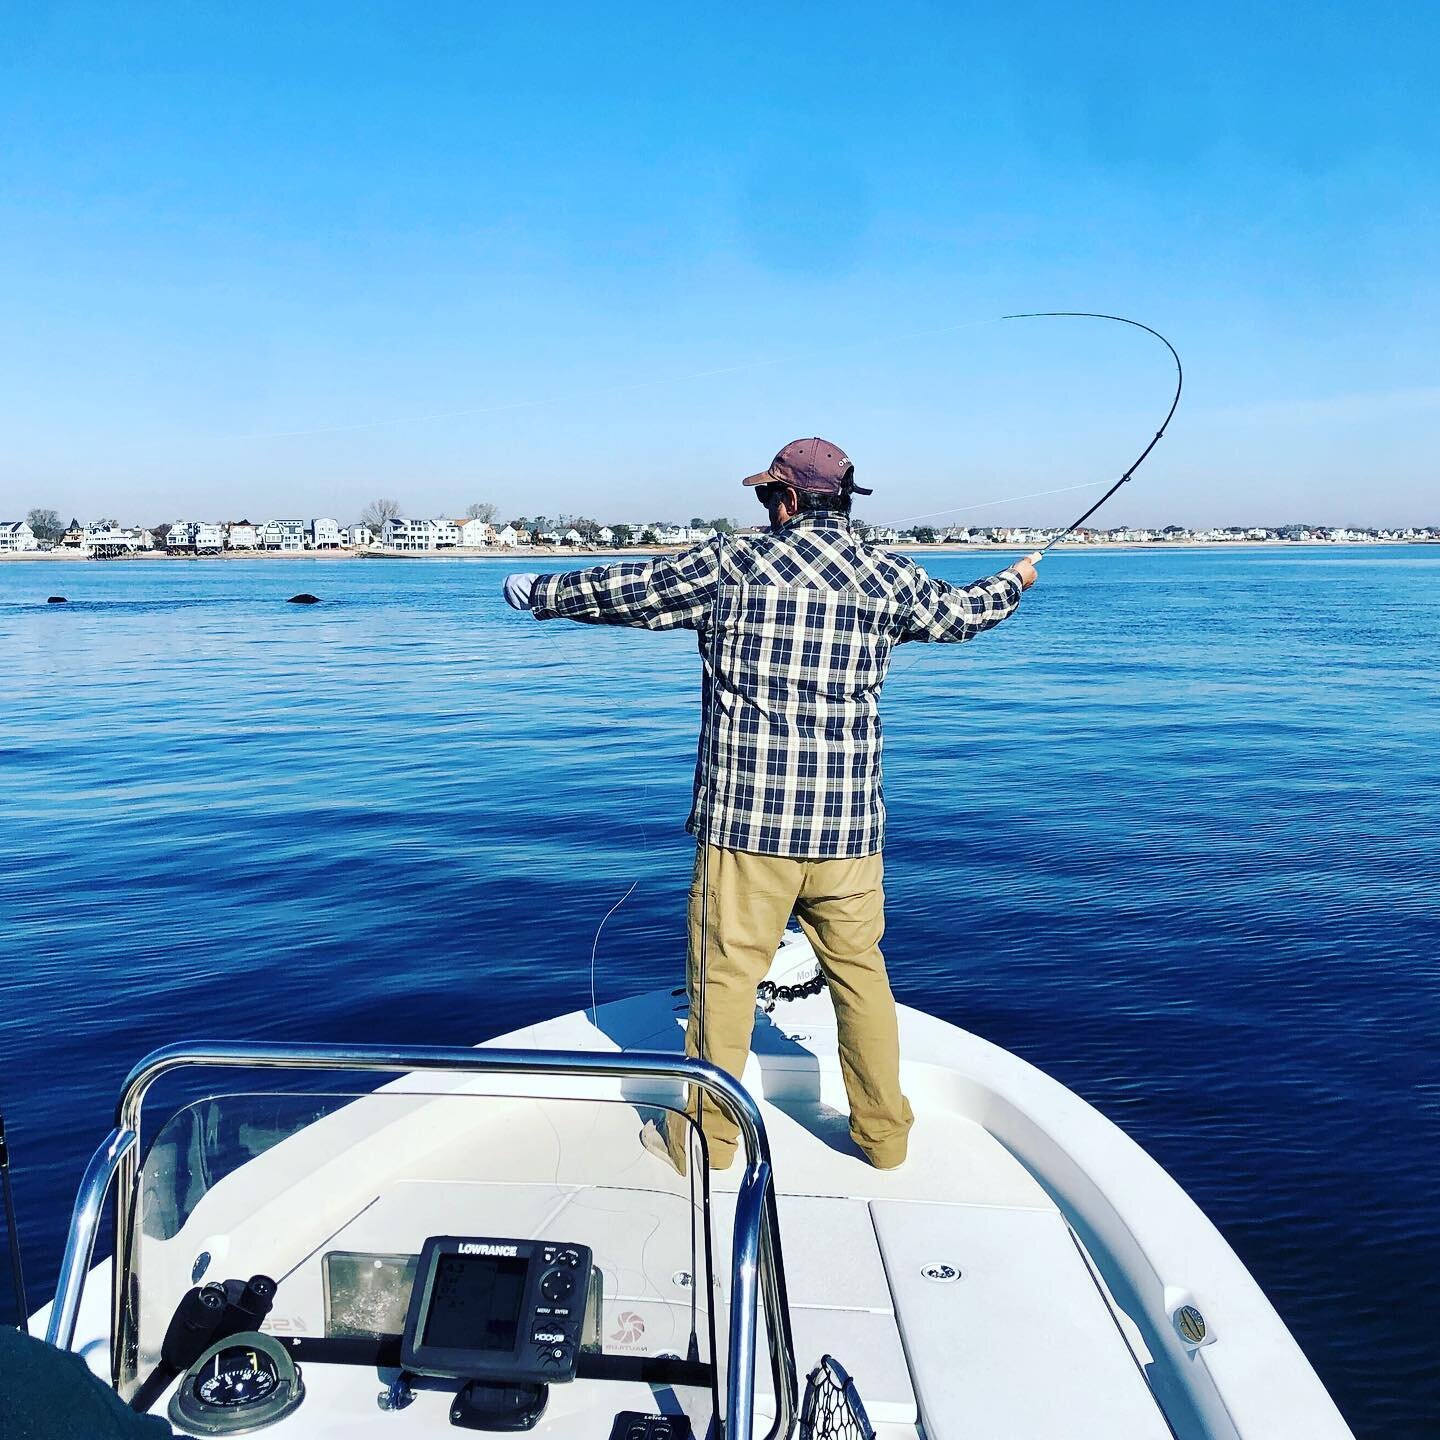 Double hauling for stripers on the sound. 

.
.
#stripers #striperfishing #flyfishing #connecticut #longislandsound #fishing #fishinglife